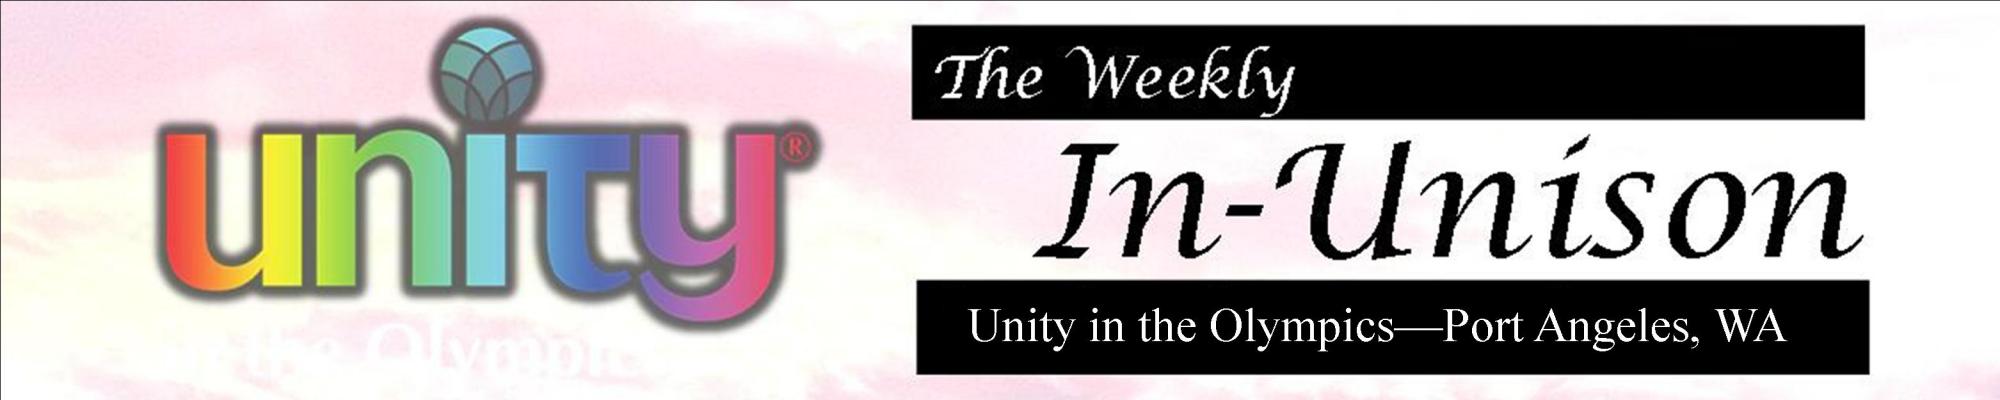 The Weekly IN-UNISON  Wednesday, November 29, 2023 Edition